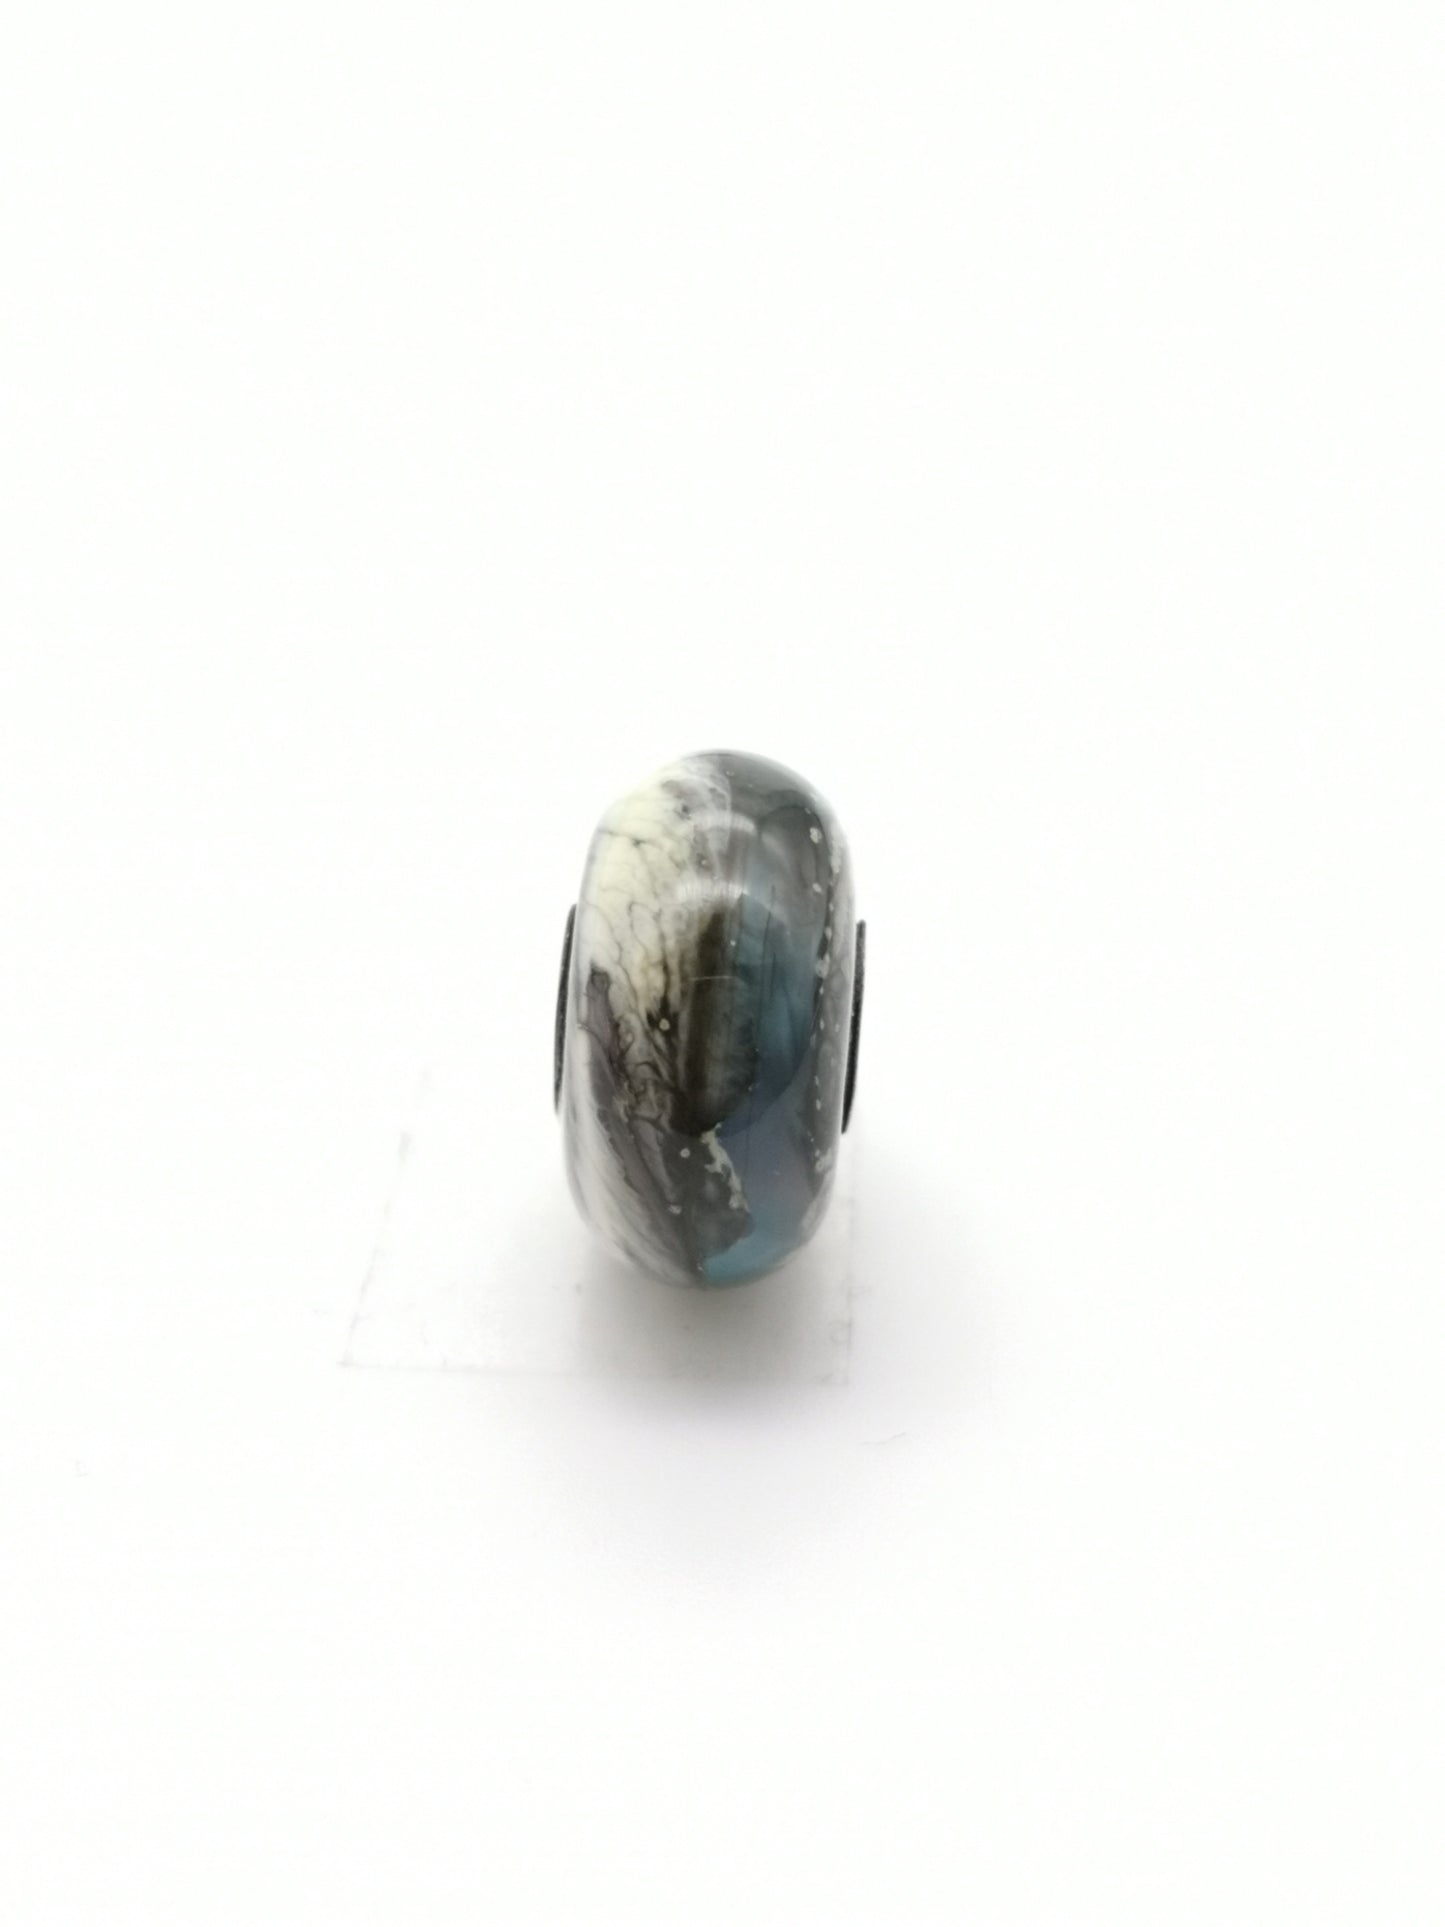 Beads not trollbeads - Unique Handcrafted - Northern Sky 